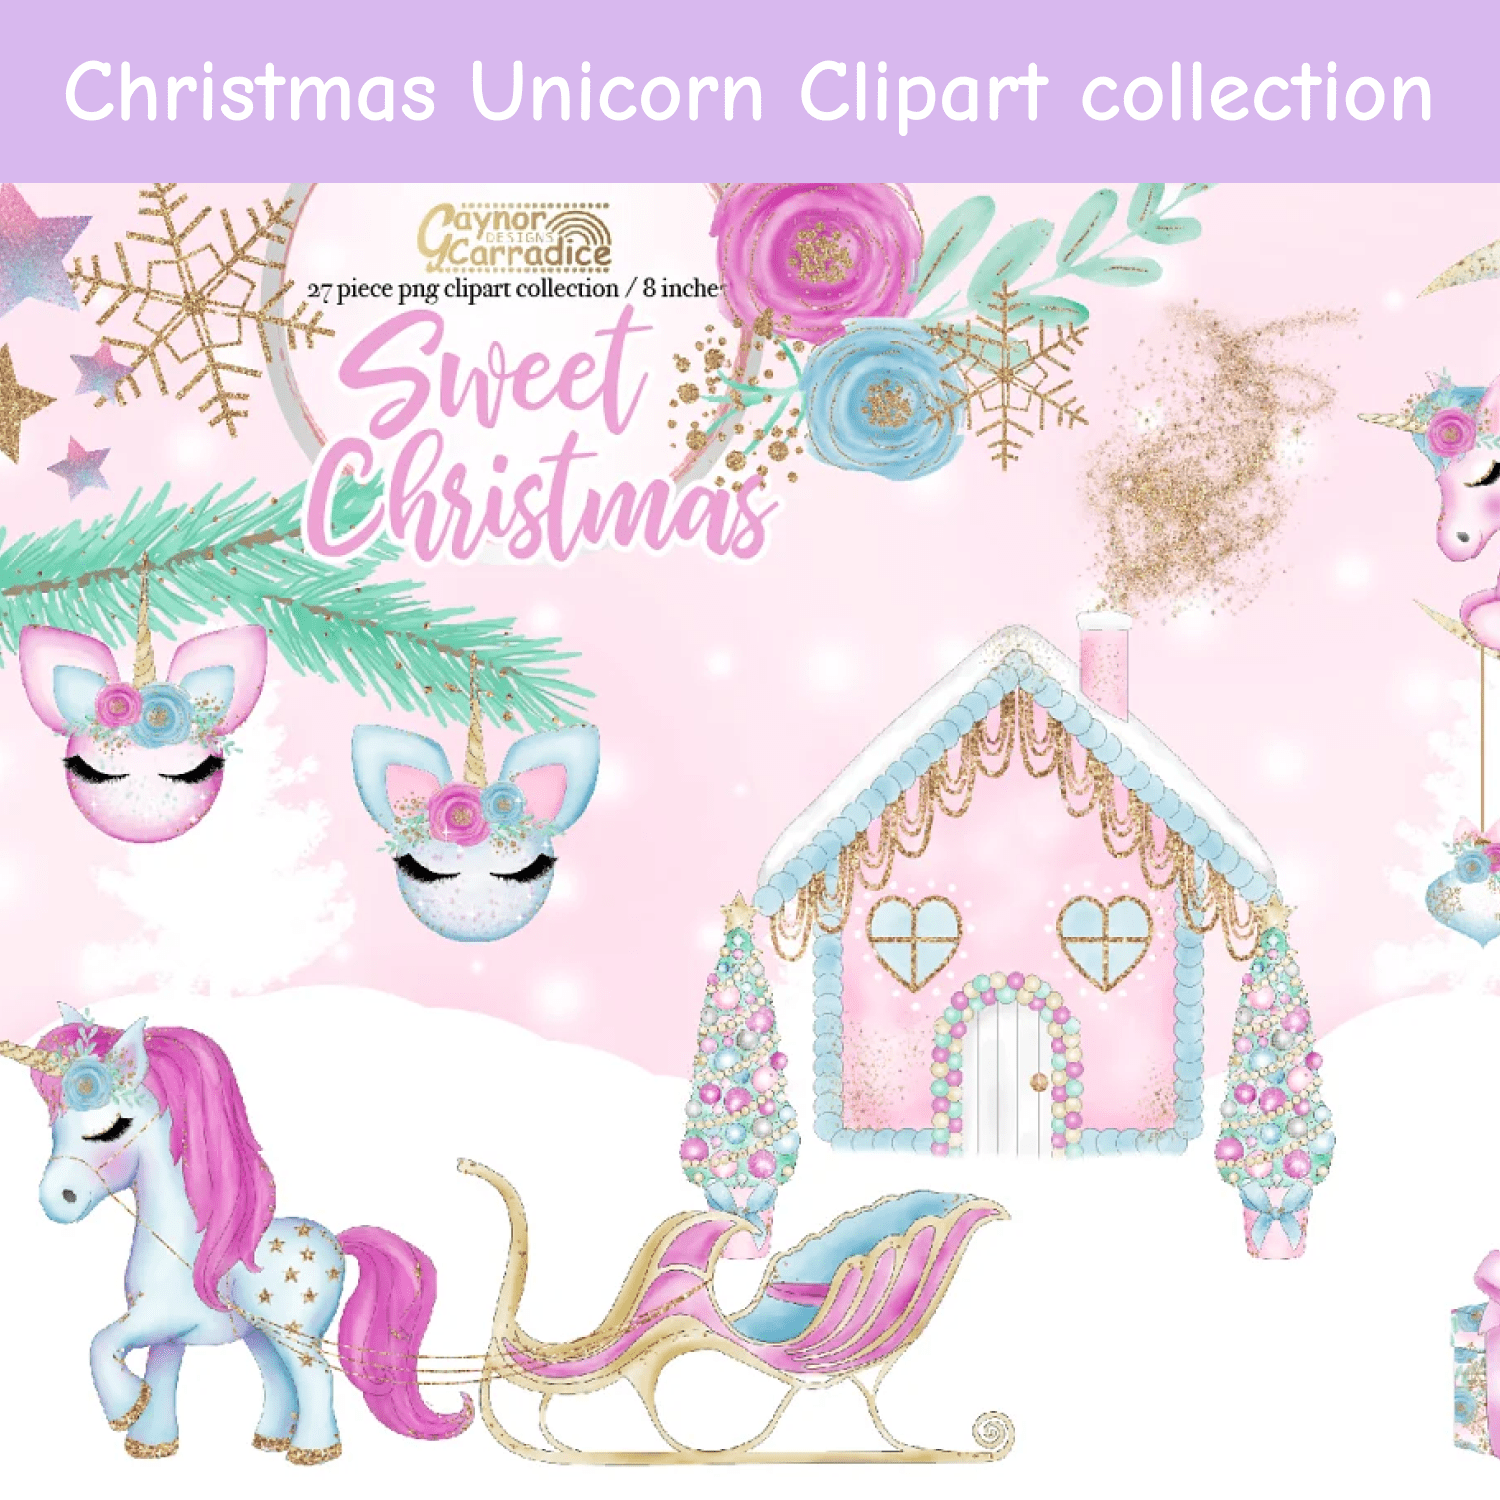 Christmas Unicorn Clipart collection.